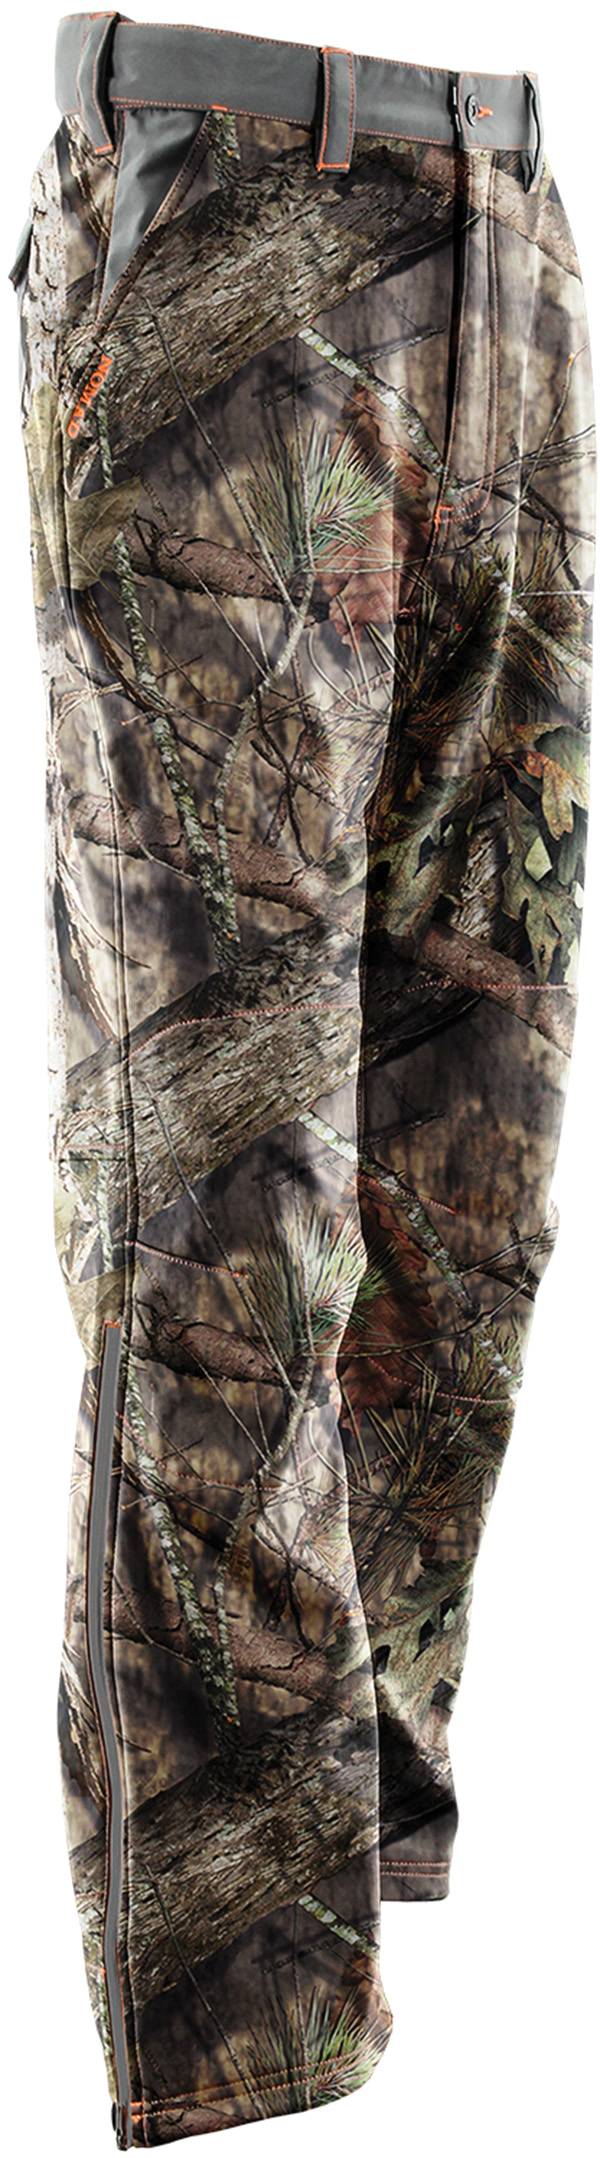 NOMAD Men's Harvester Hunting Pants product image